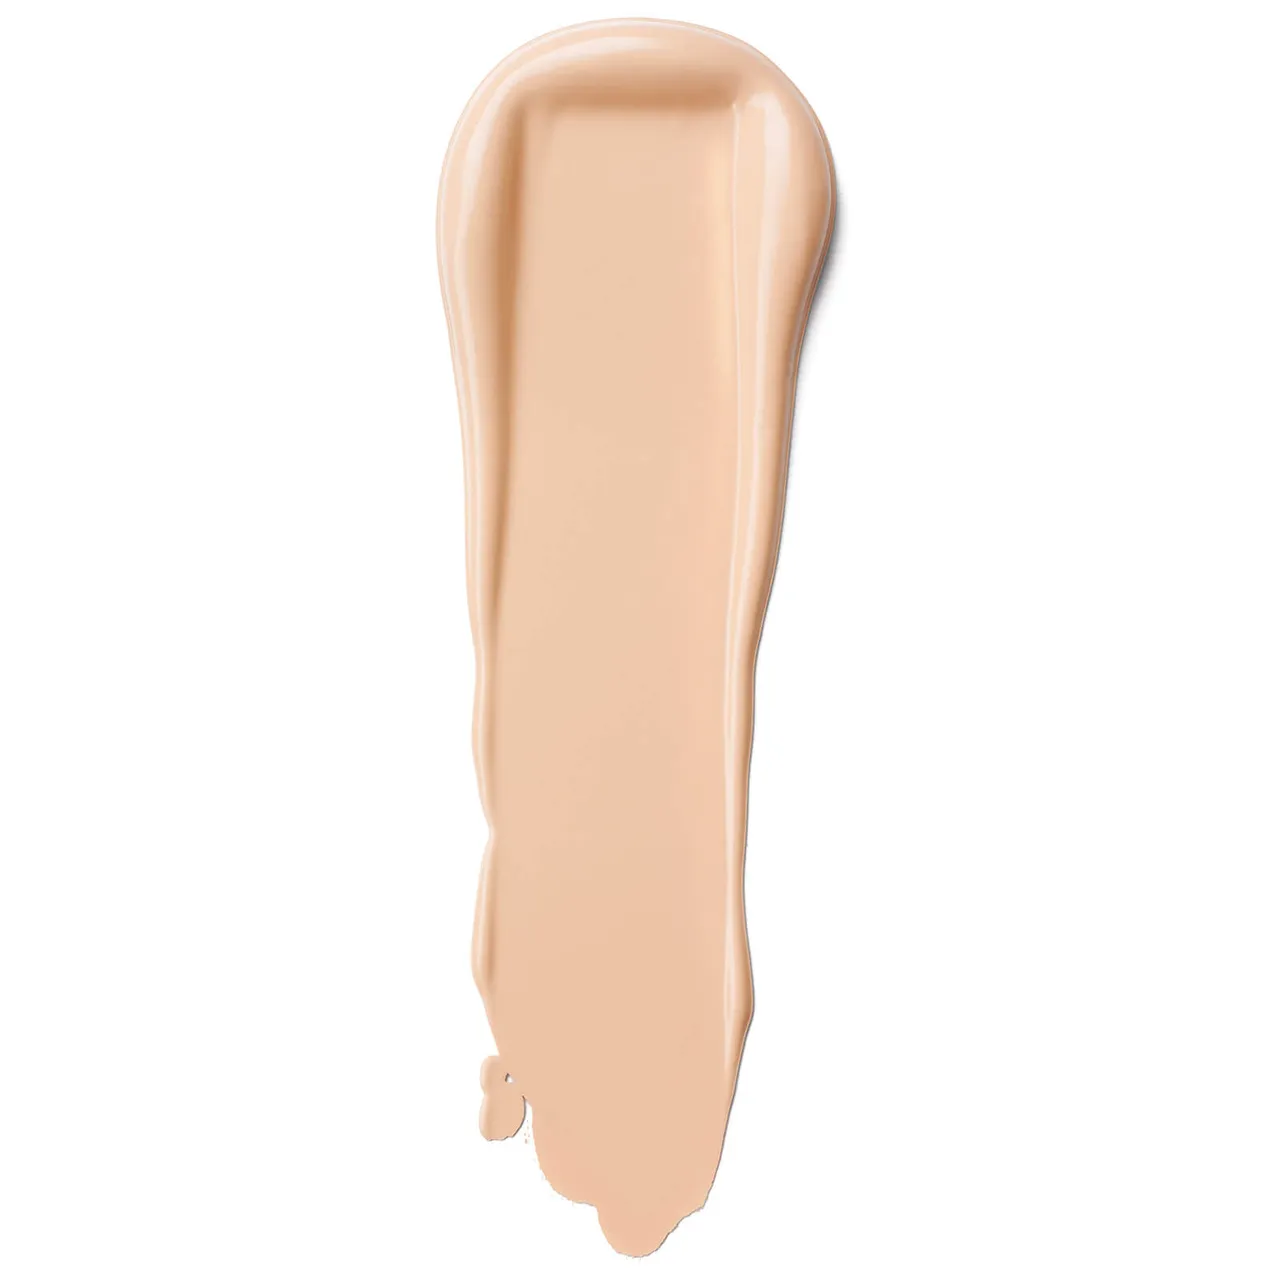 Clinique Beyond Perfecting Foundation and Concealer 30ml (Various Shades) - Alabaster